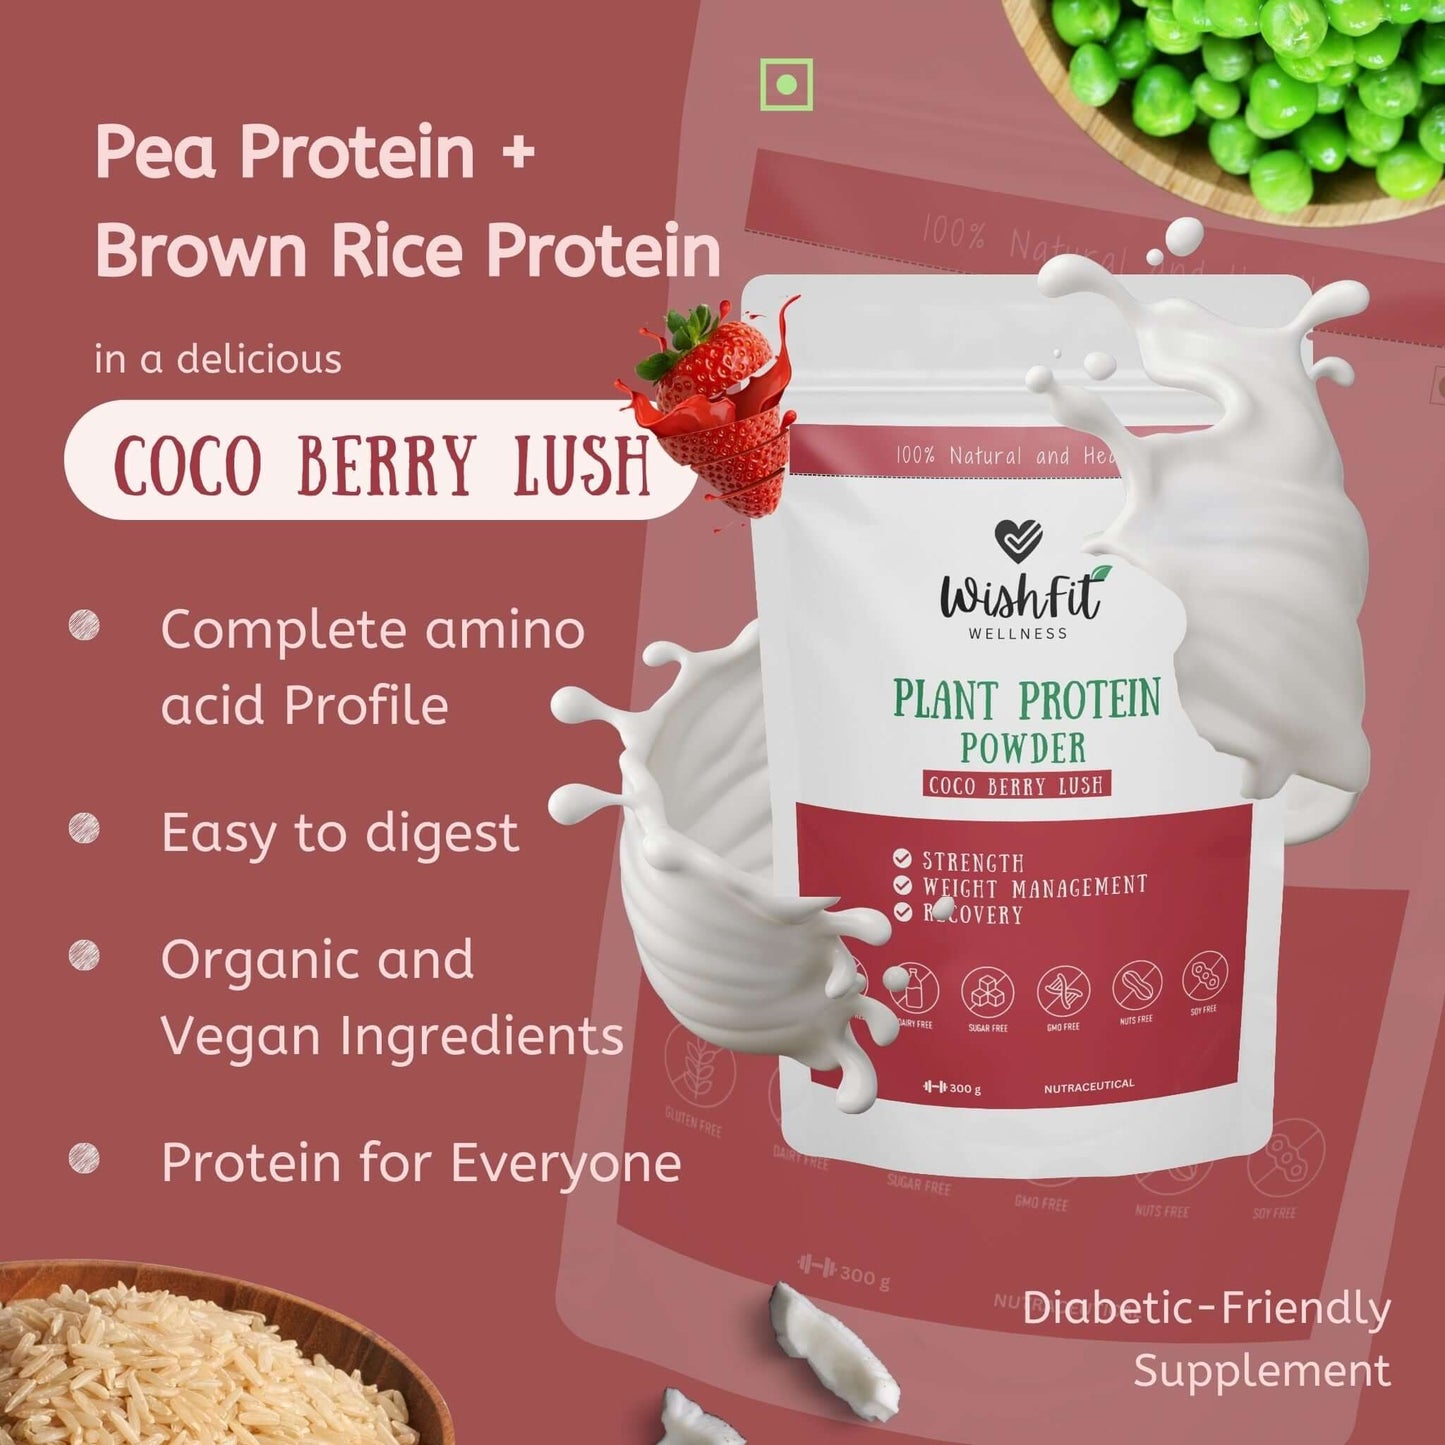 Pea protein and brown rice protien benefits